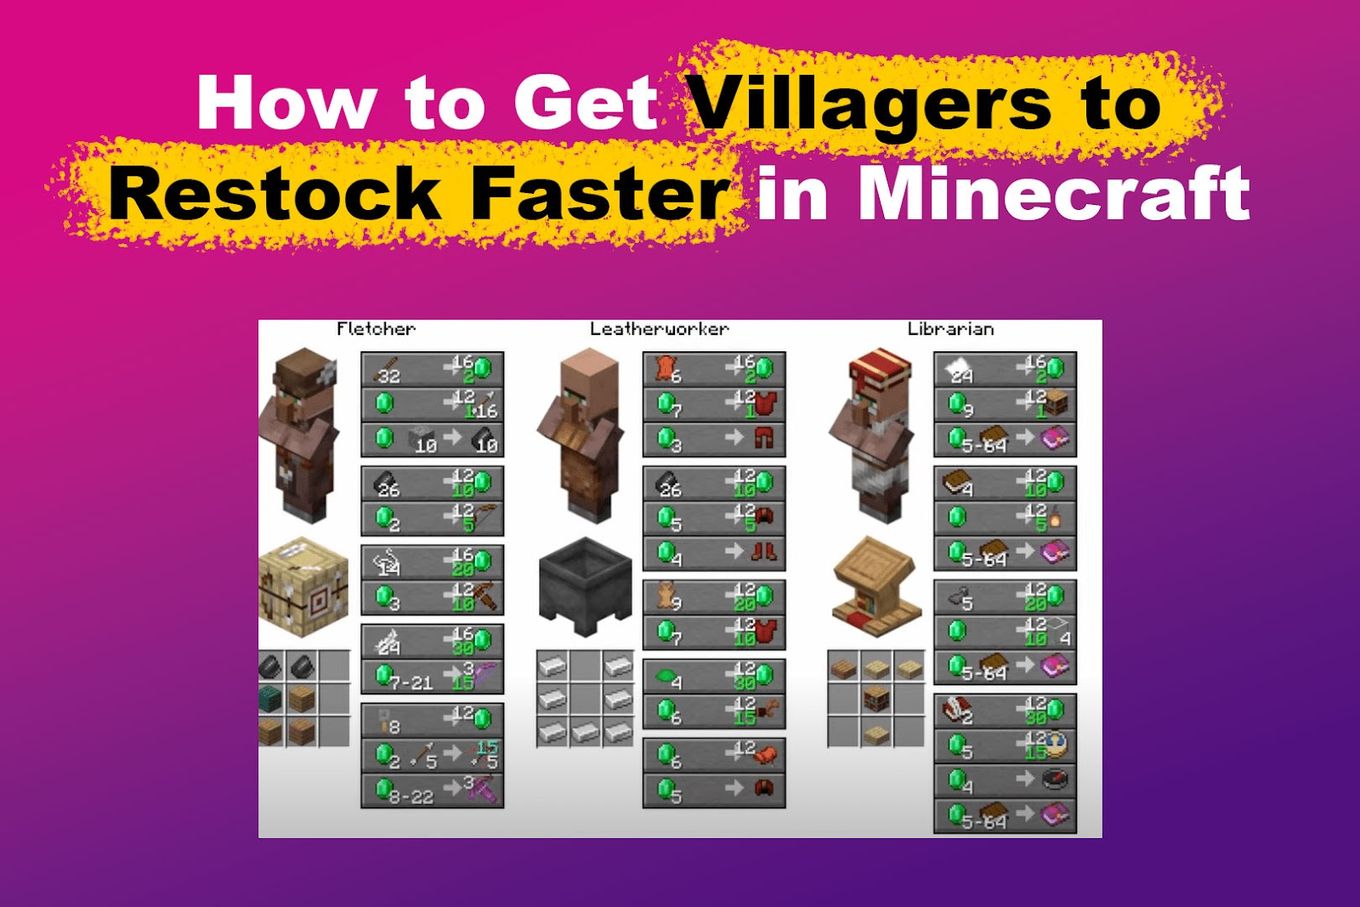 How to Get Villagers to Restock Faster in Minecraft